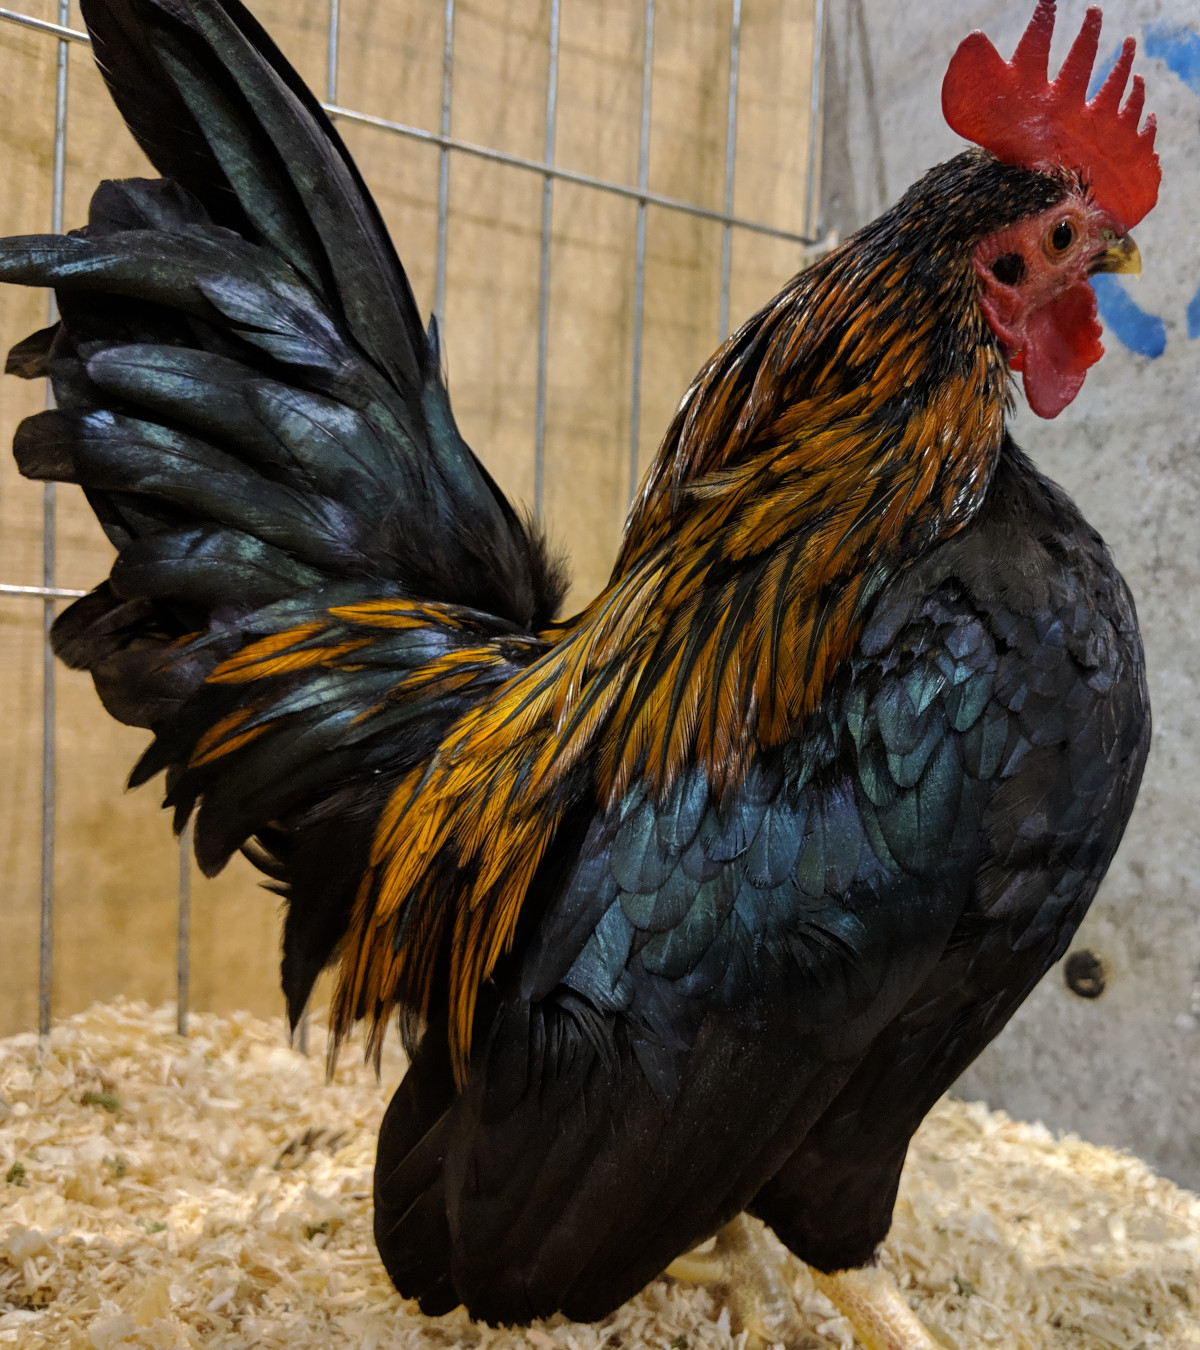 An impressive Black red Japanese bantam cockerel in a poultry show.